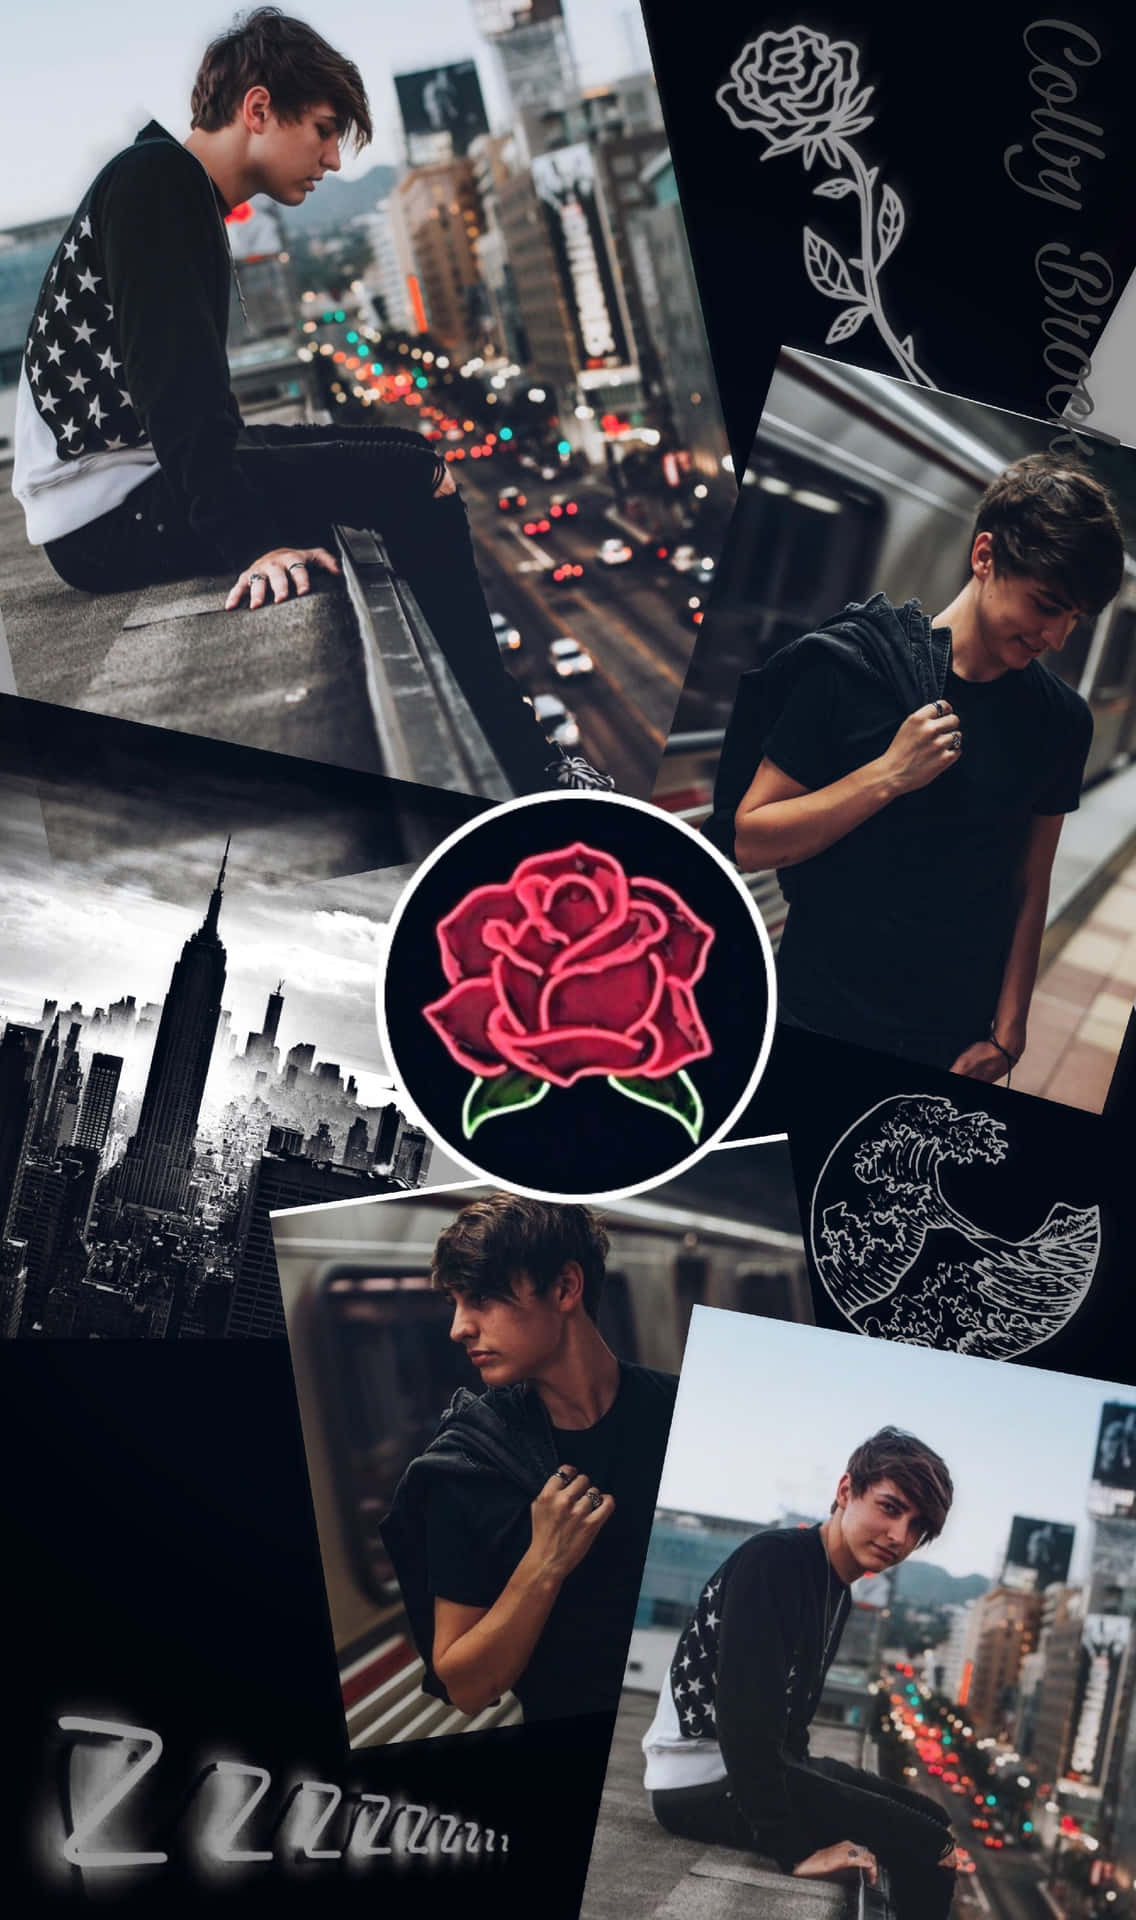 A Collage Of Photos Of A Man With A Rose Wallpaper